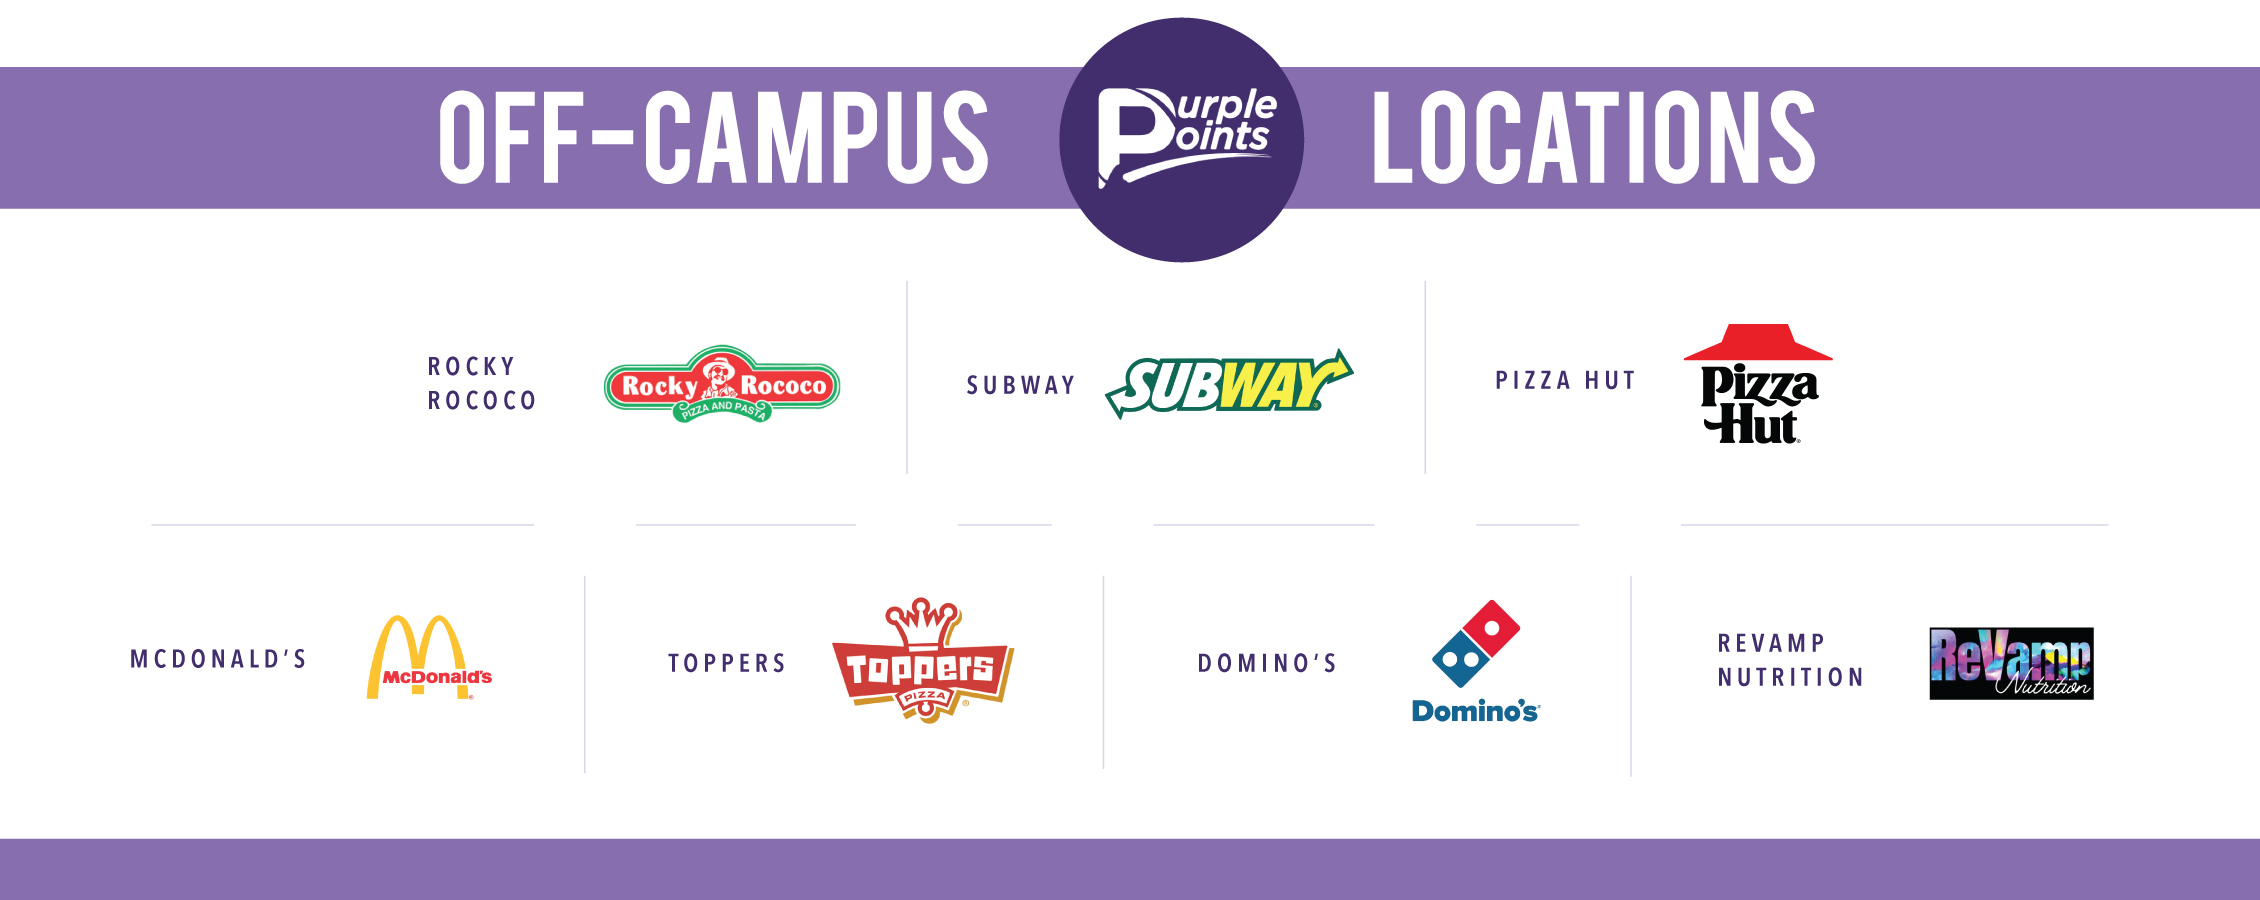 Hawkcard Off-Campus Purple Points Options